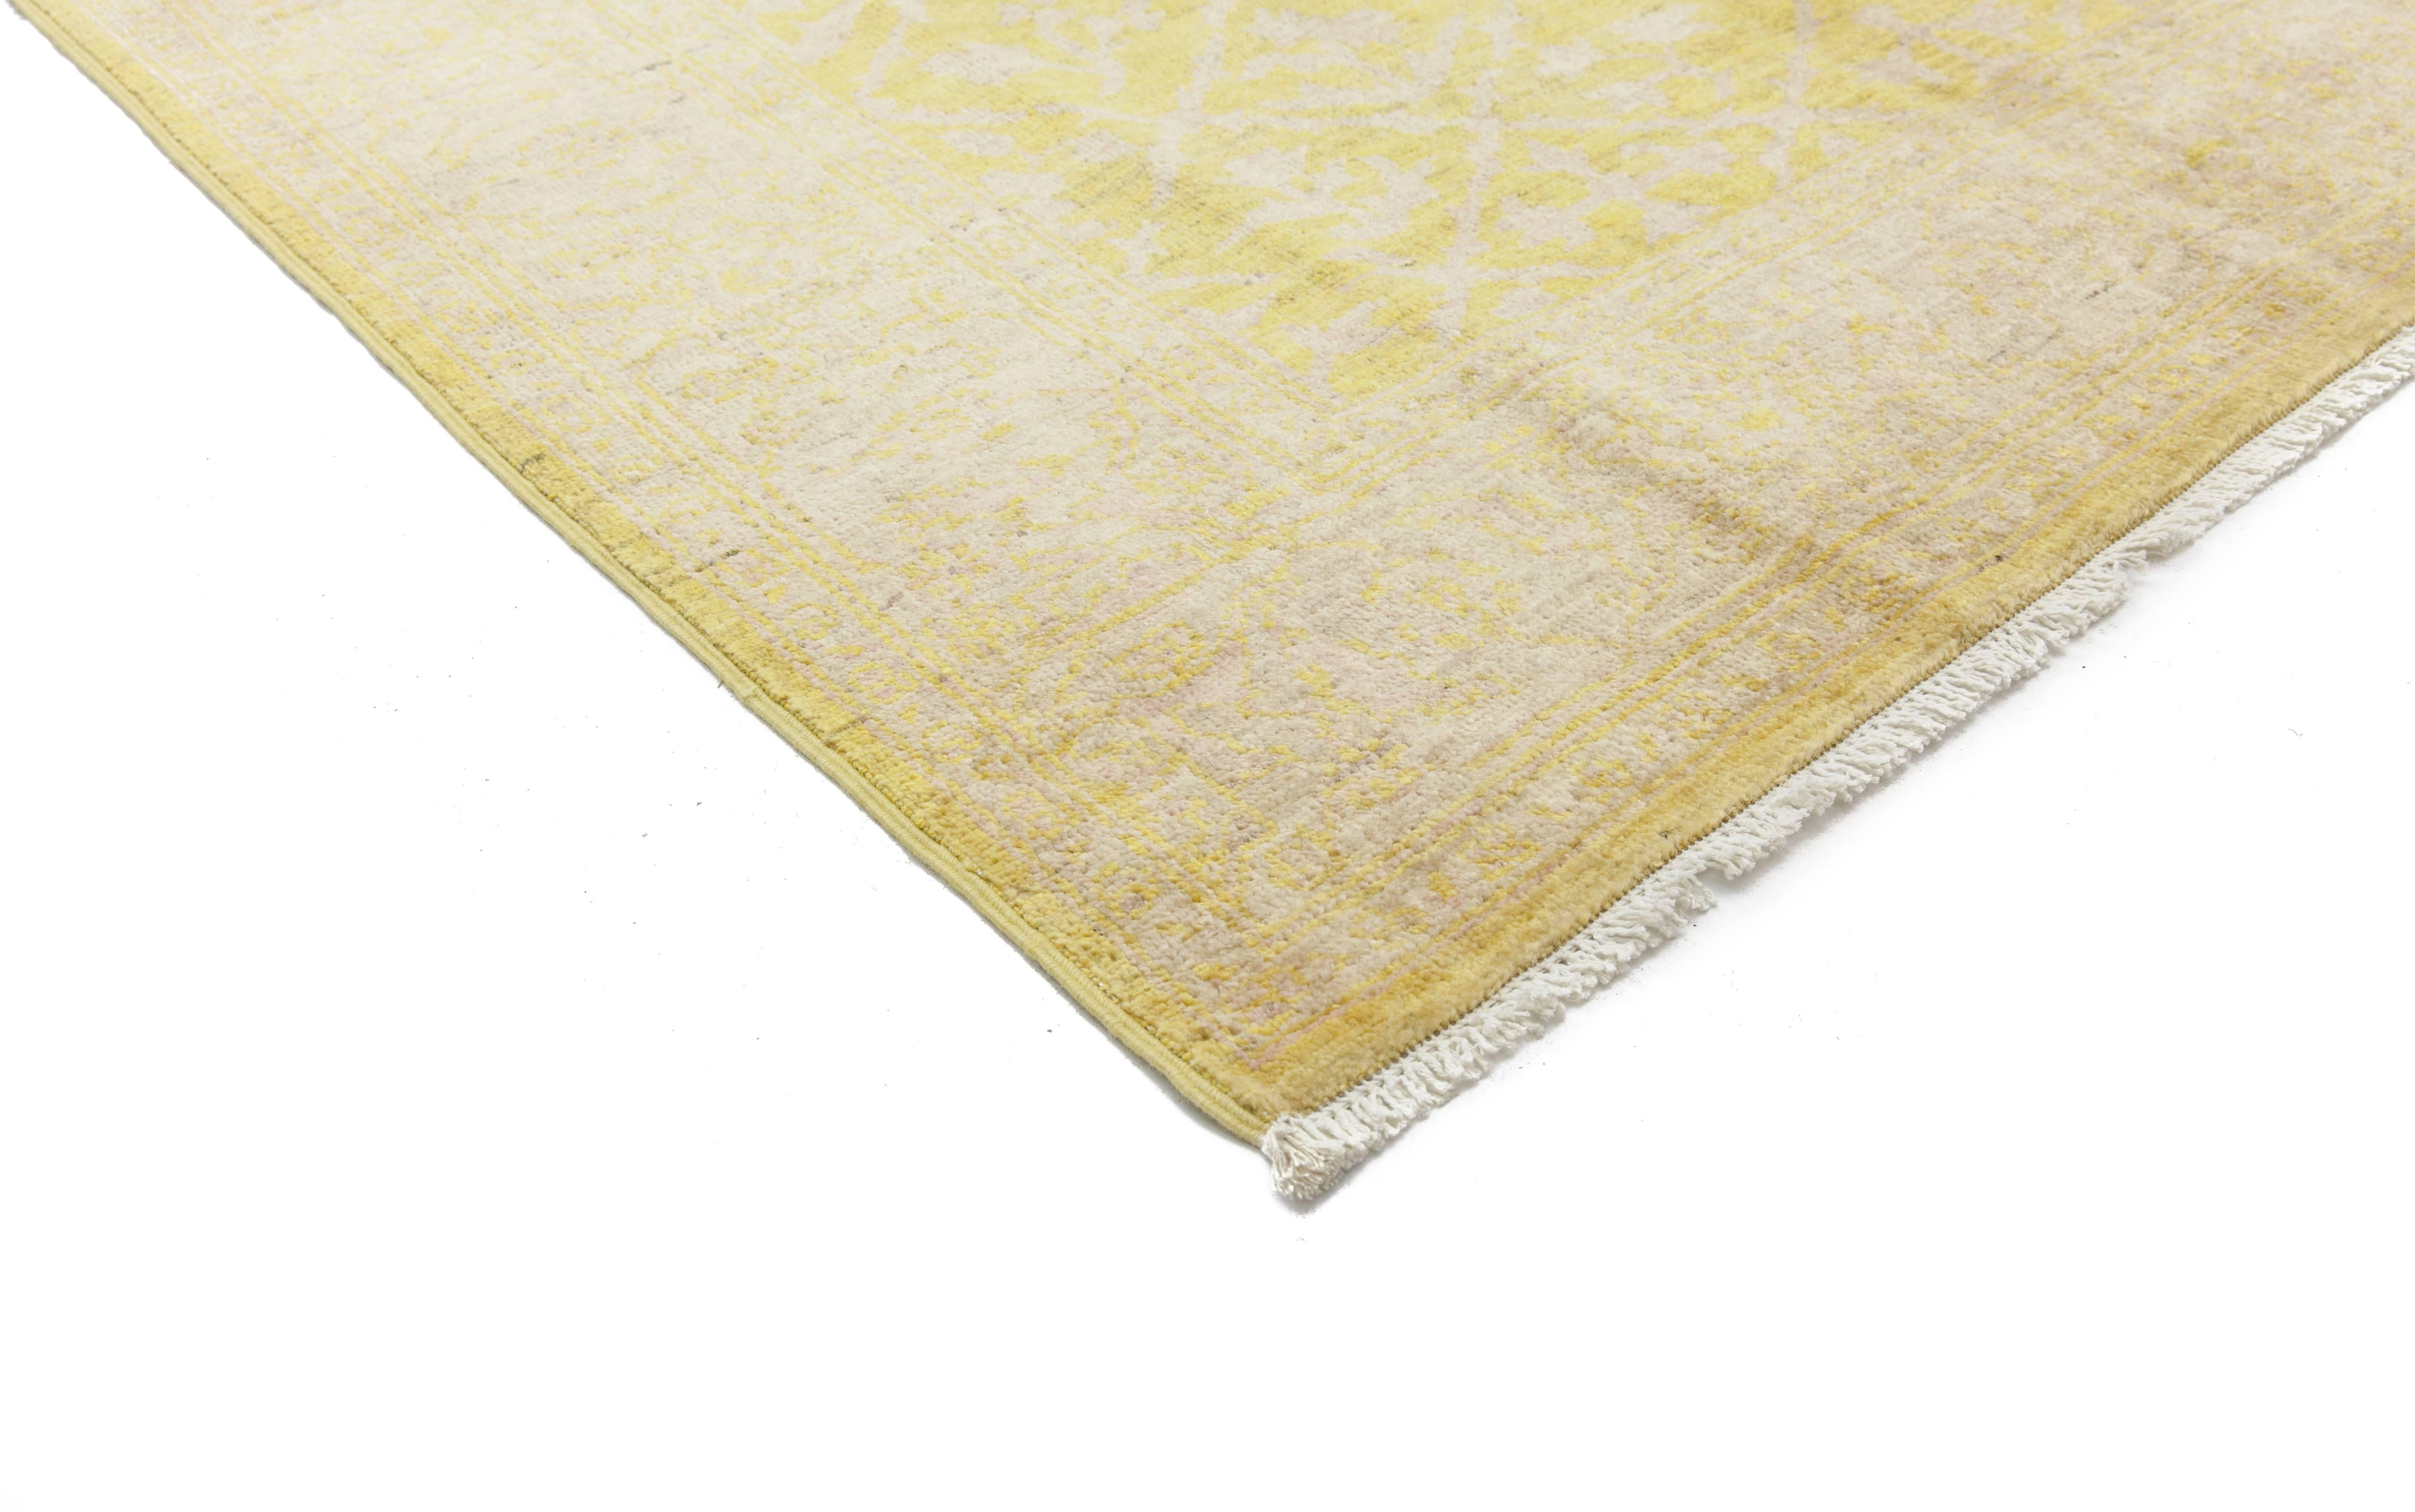 Color: Yellow - Made In: Pakistan. 100% Wool. Originating centuries ago in what is now Turkey, Oushak rugs have long been sought after for their intricate patterns, lush yet subtle colors, and soft luster. These rugs continue that tradition.